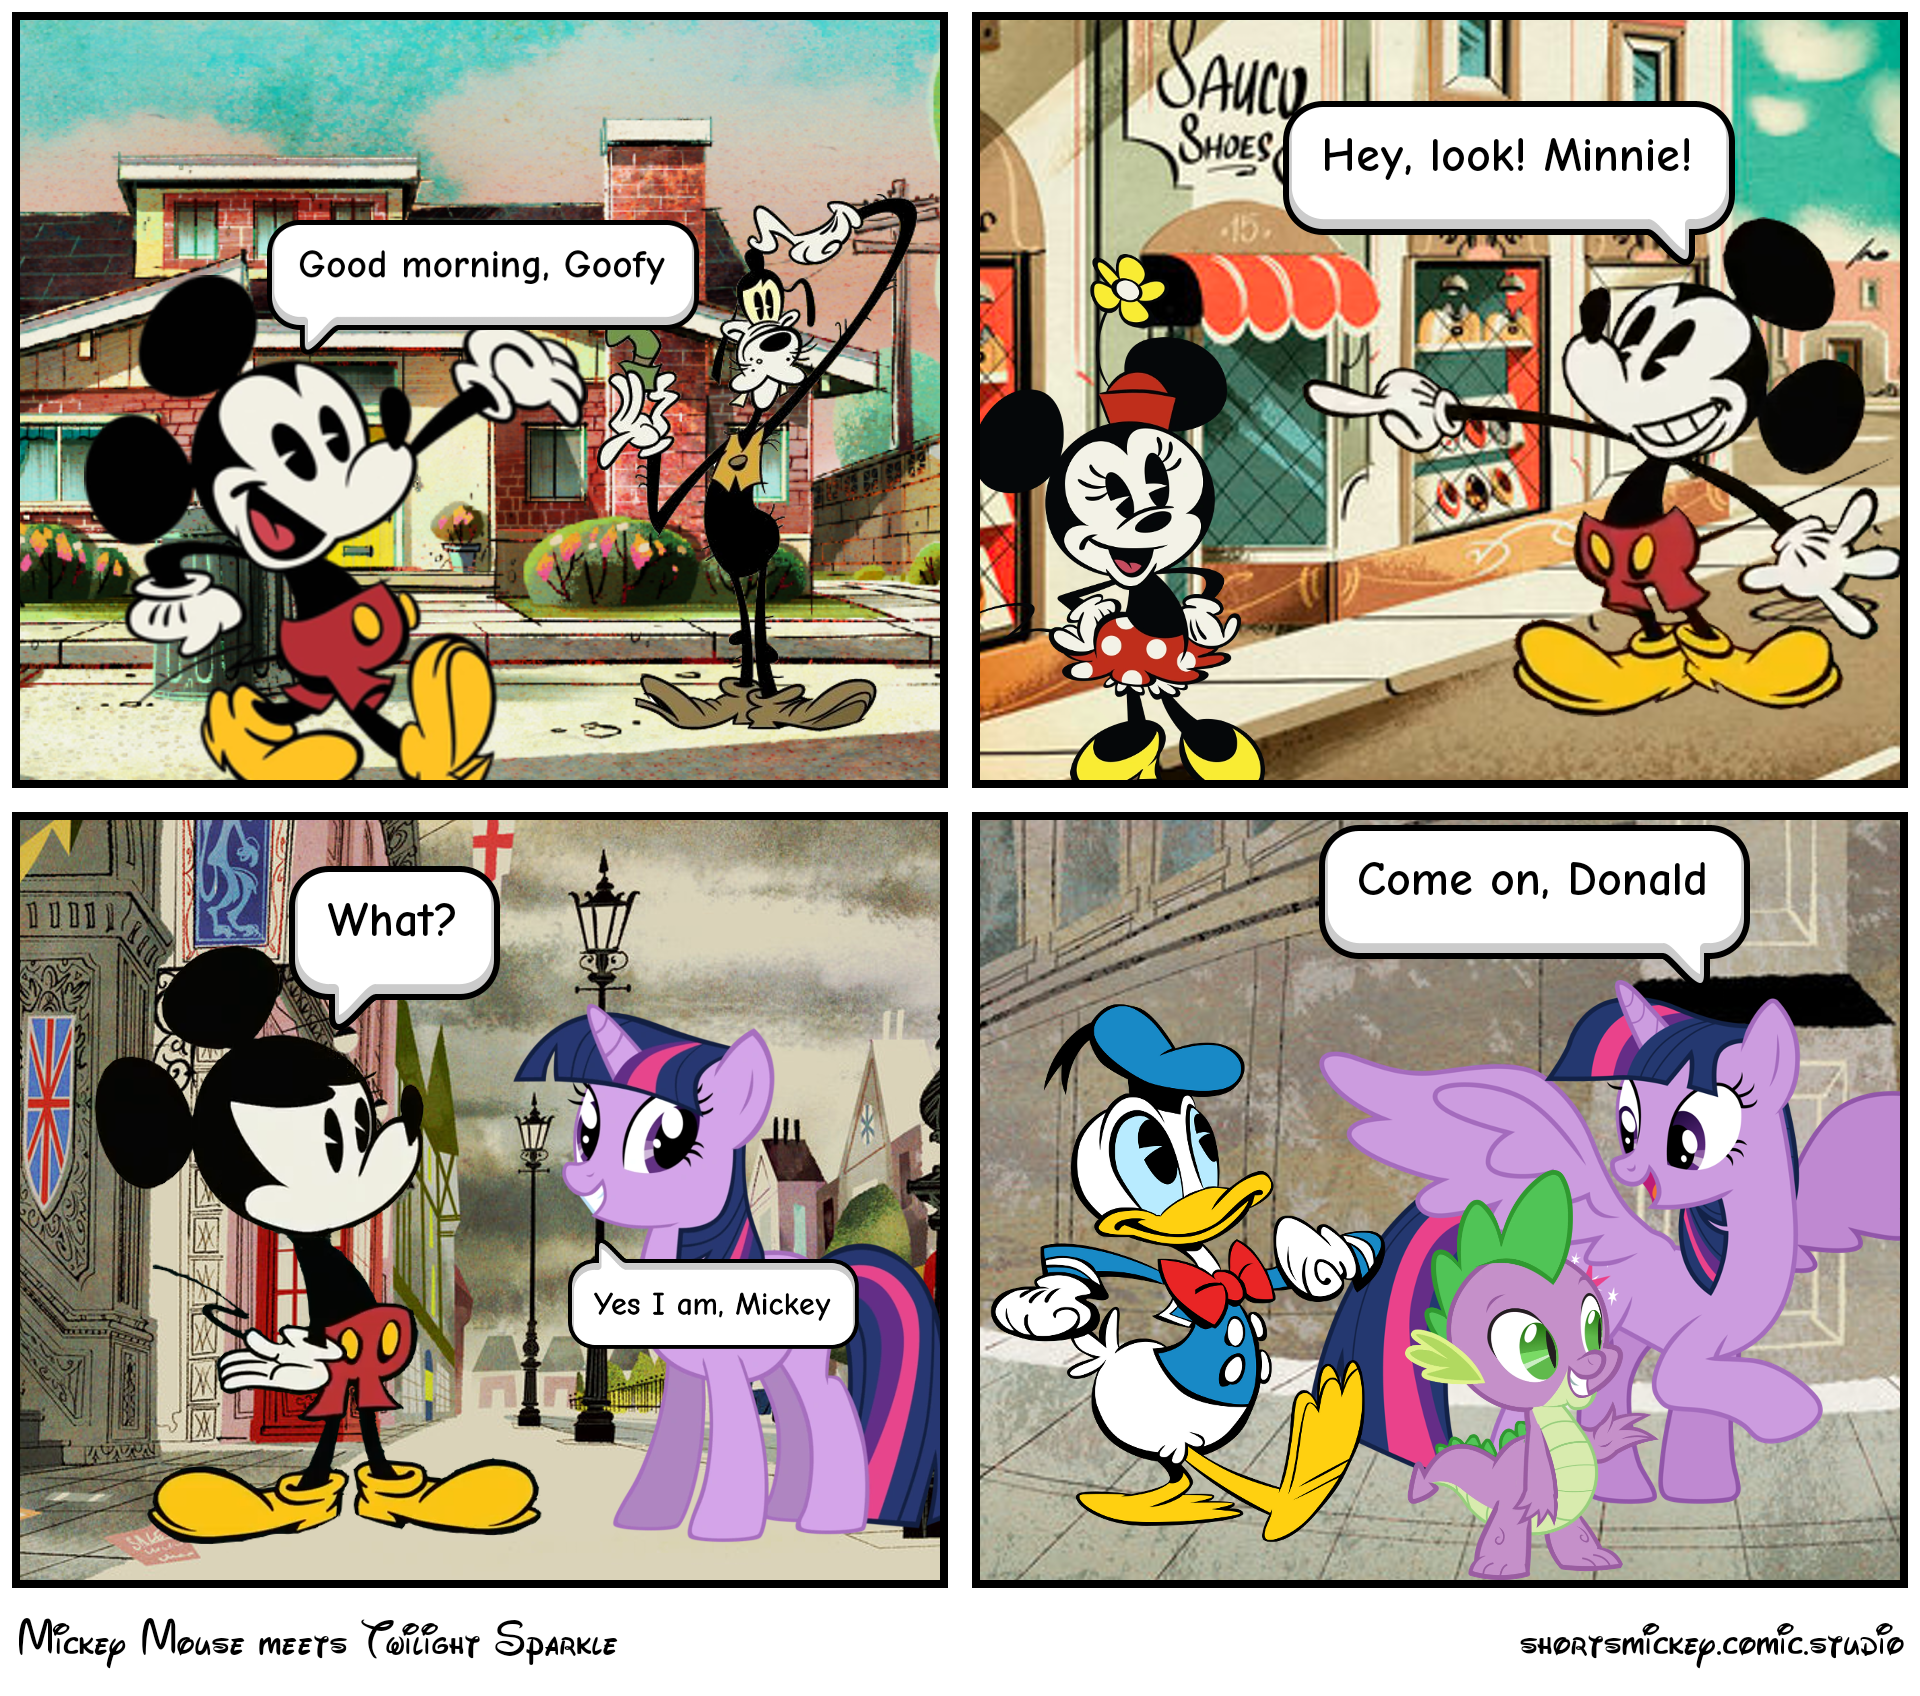 Mickey Mouse meets Twilight Sparkle